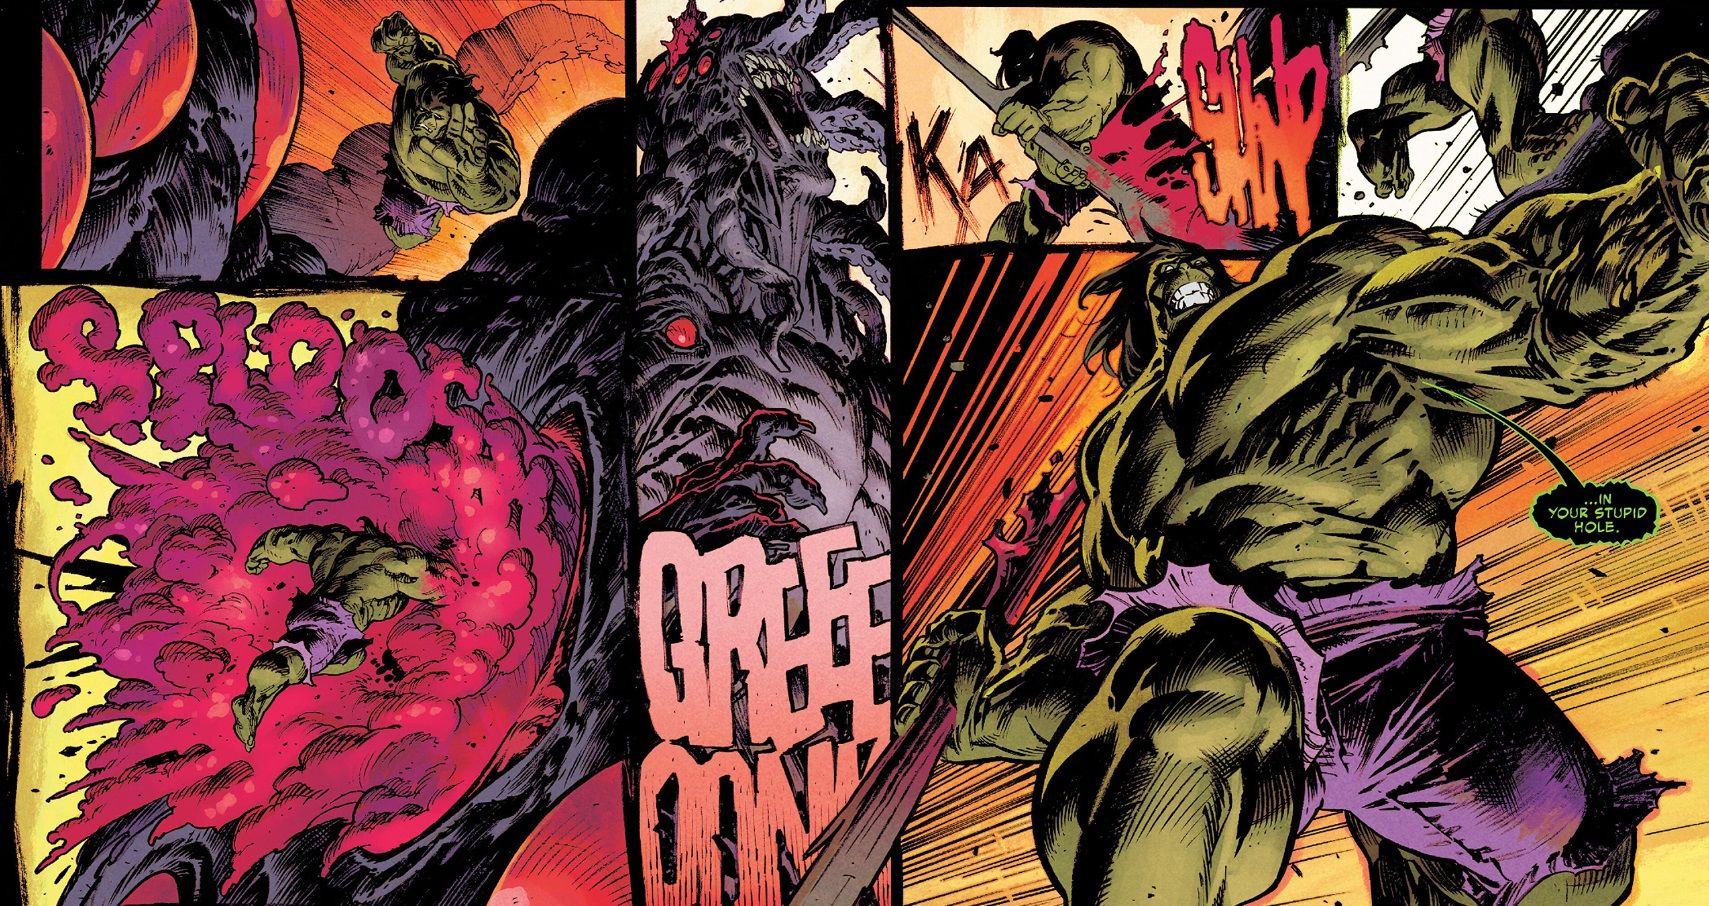 The Hulk attacks a gigantic, many-eyed behemoth, punching straight through the creature in an explosion of guts and snapping off its spines.